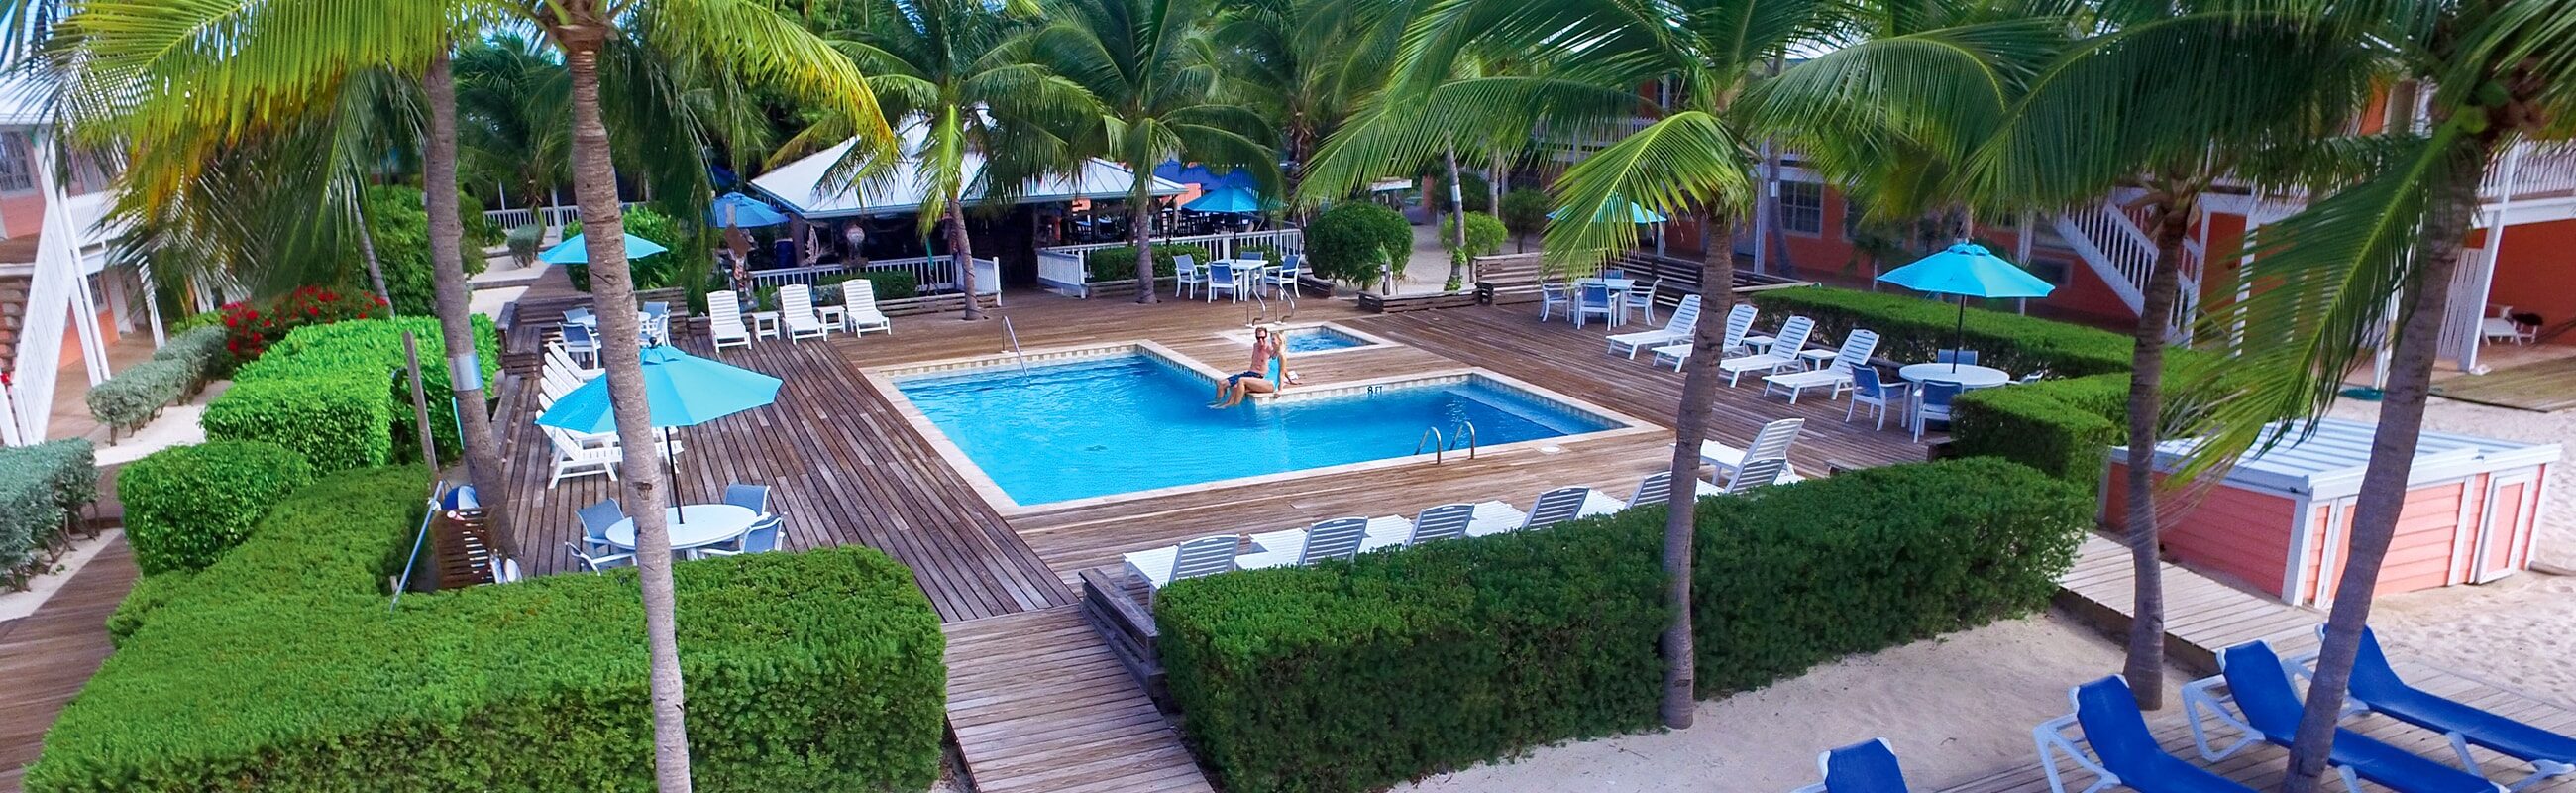 Small and intimate – our pool area is a perfect tropical oasis to enjoy after diving